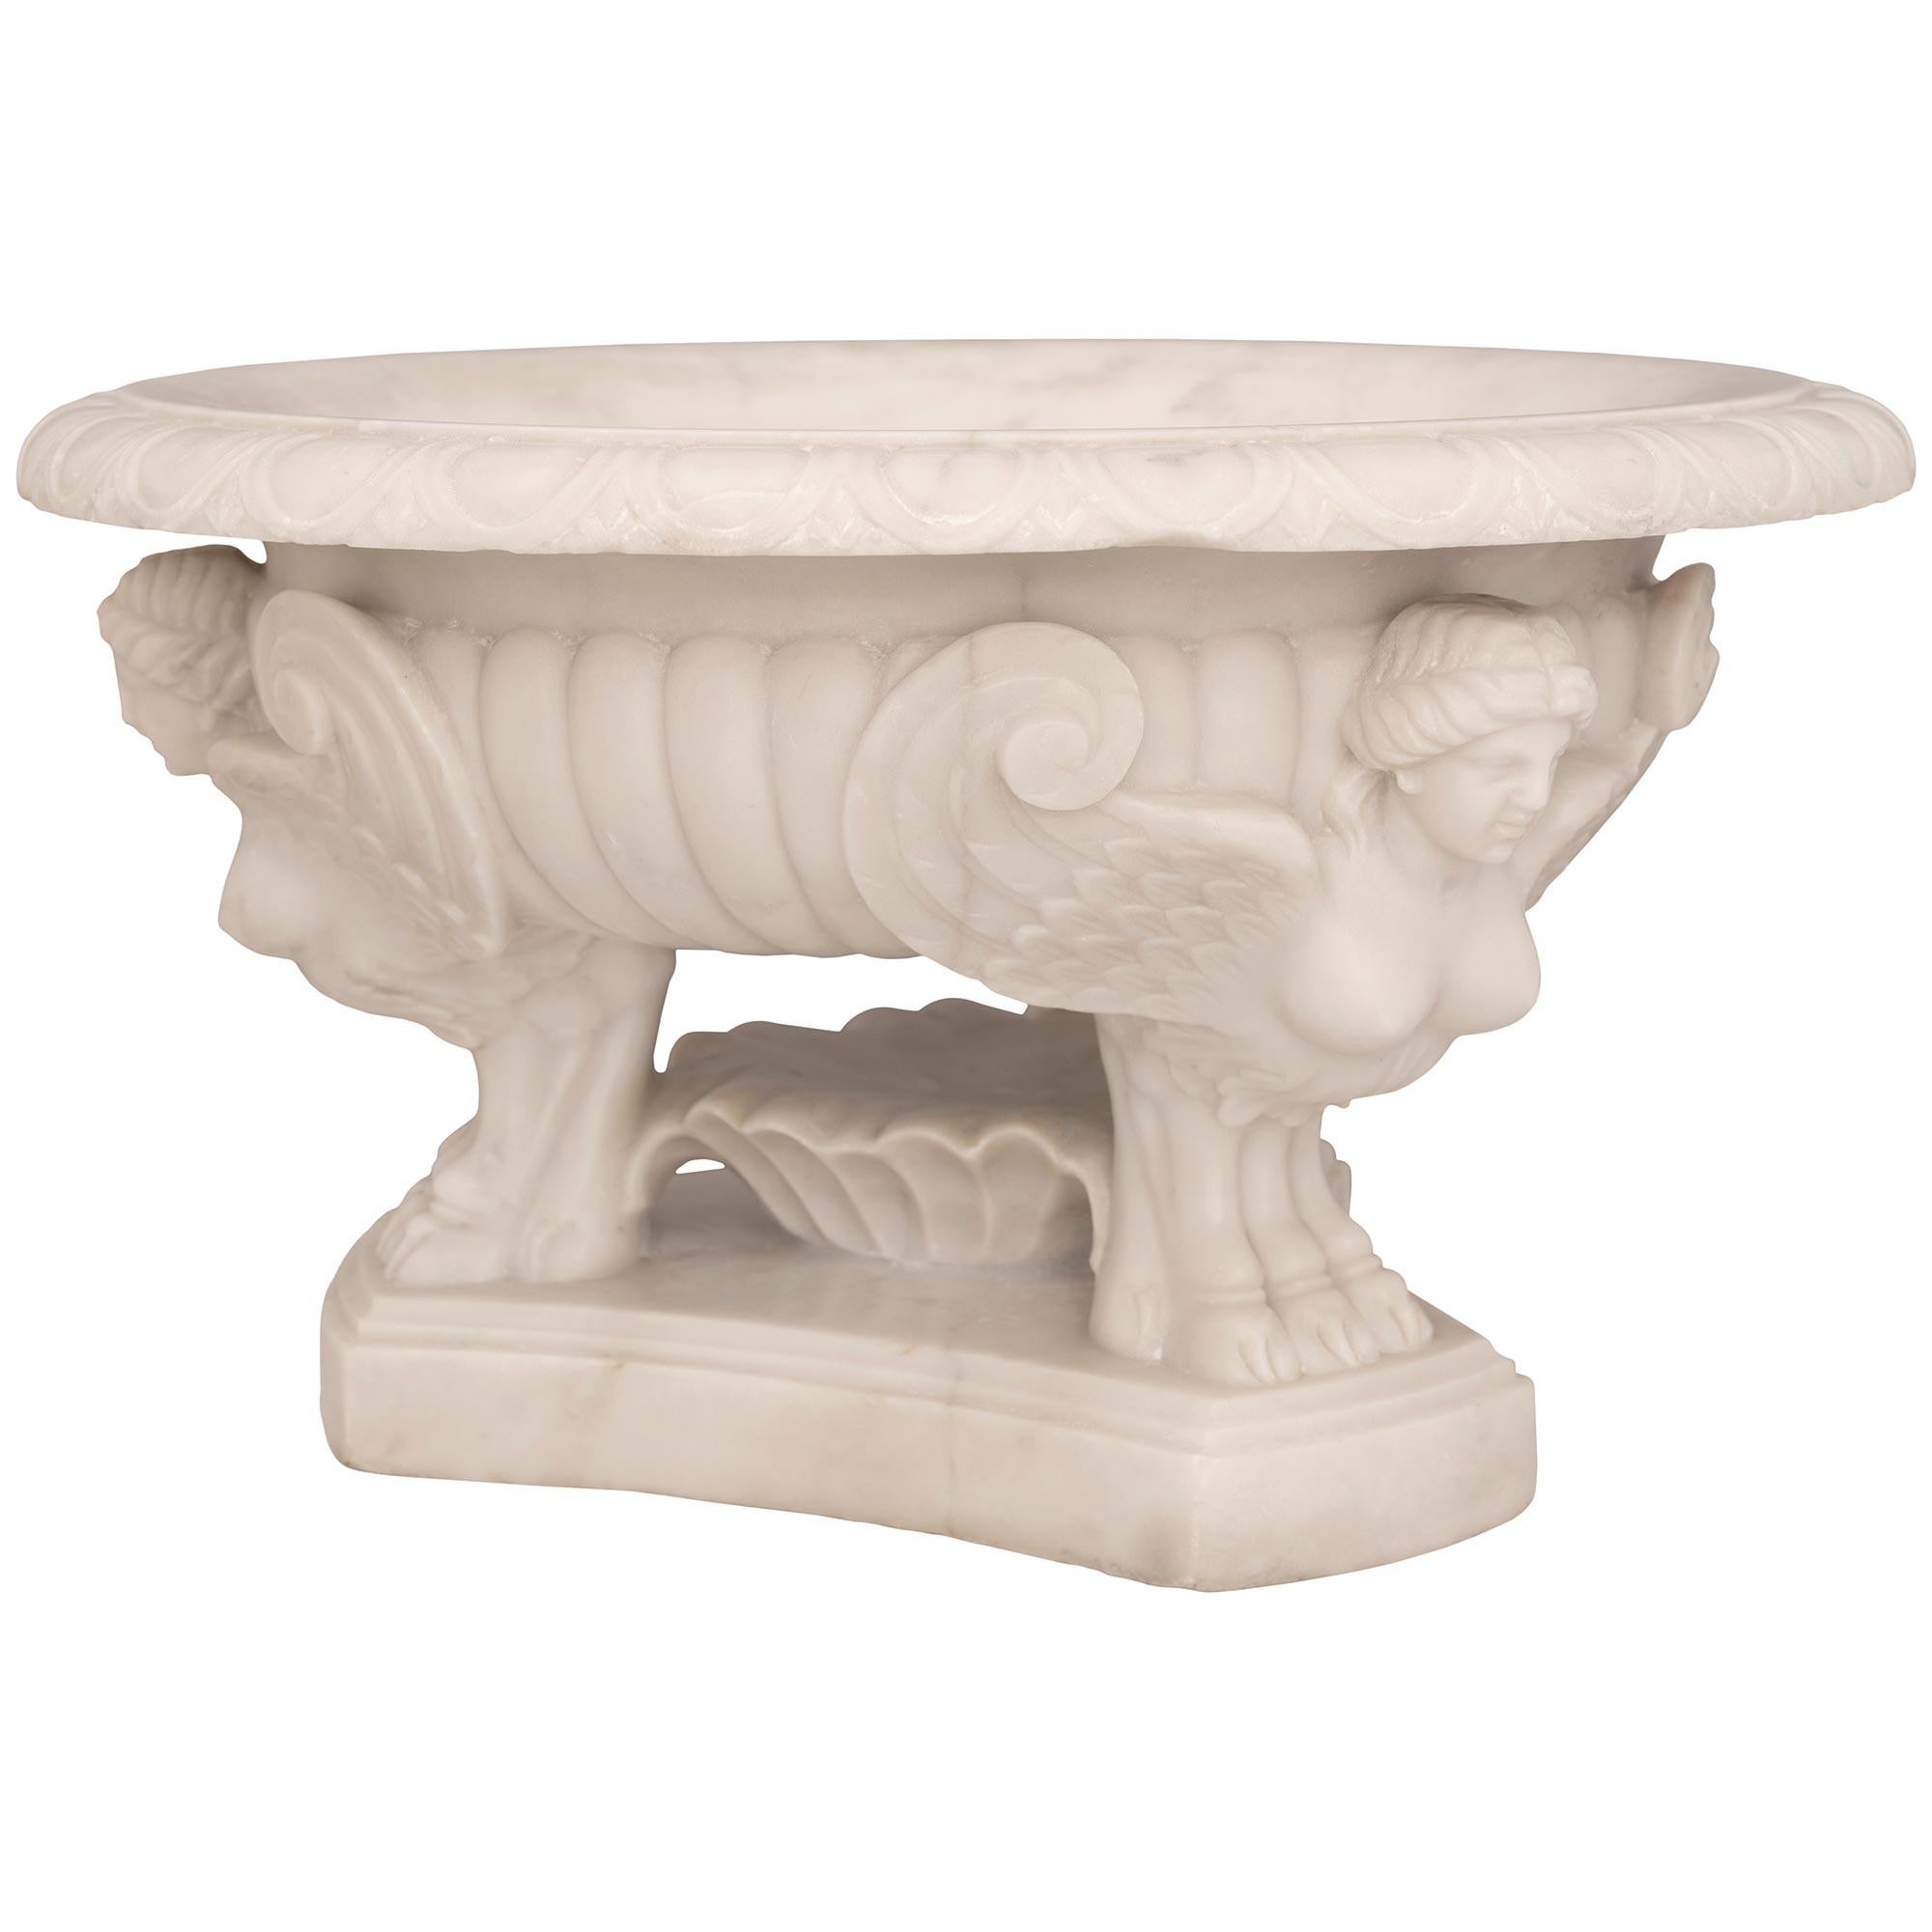 Neoclassical Italian 19th Century Neo-Classical St. White Carrara Marble Centerpiece Bowl For Sale